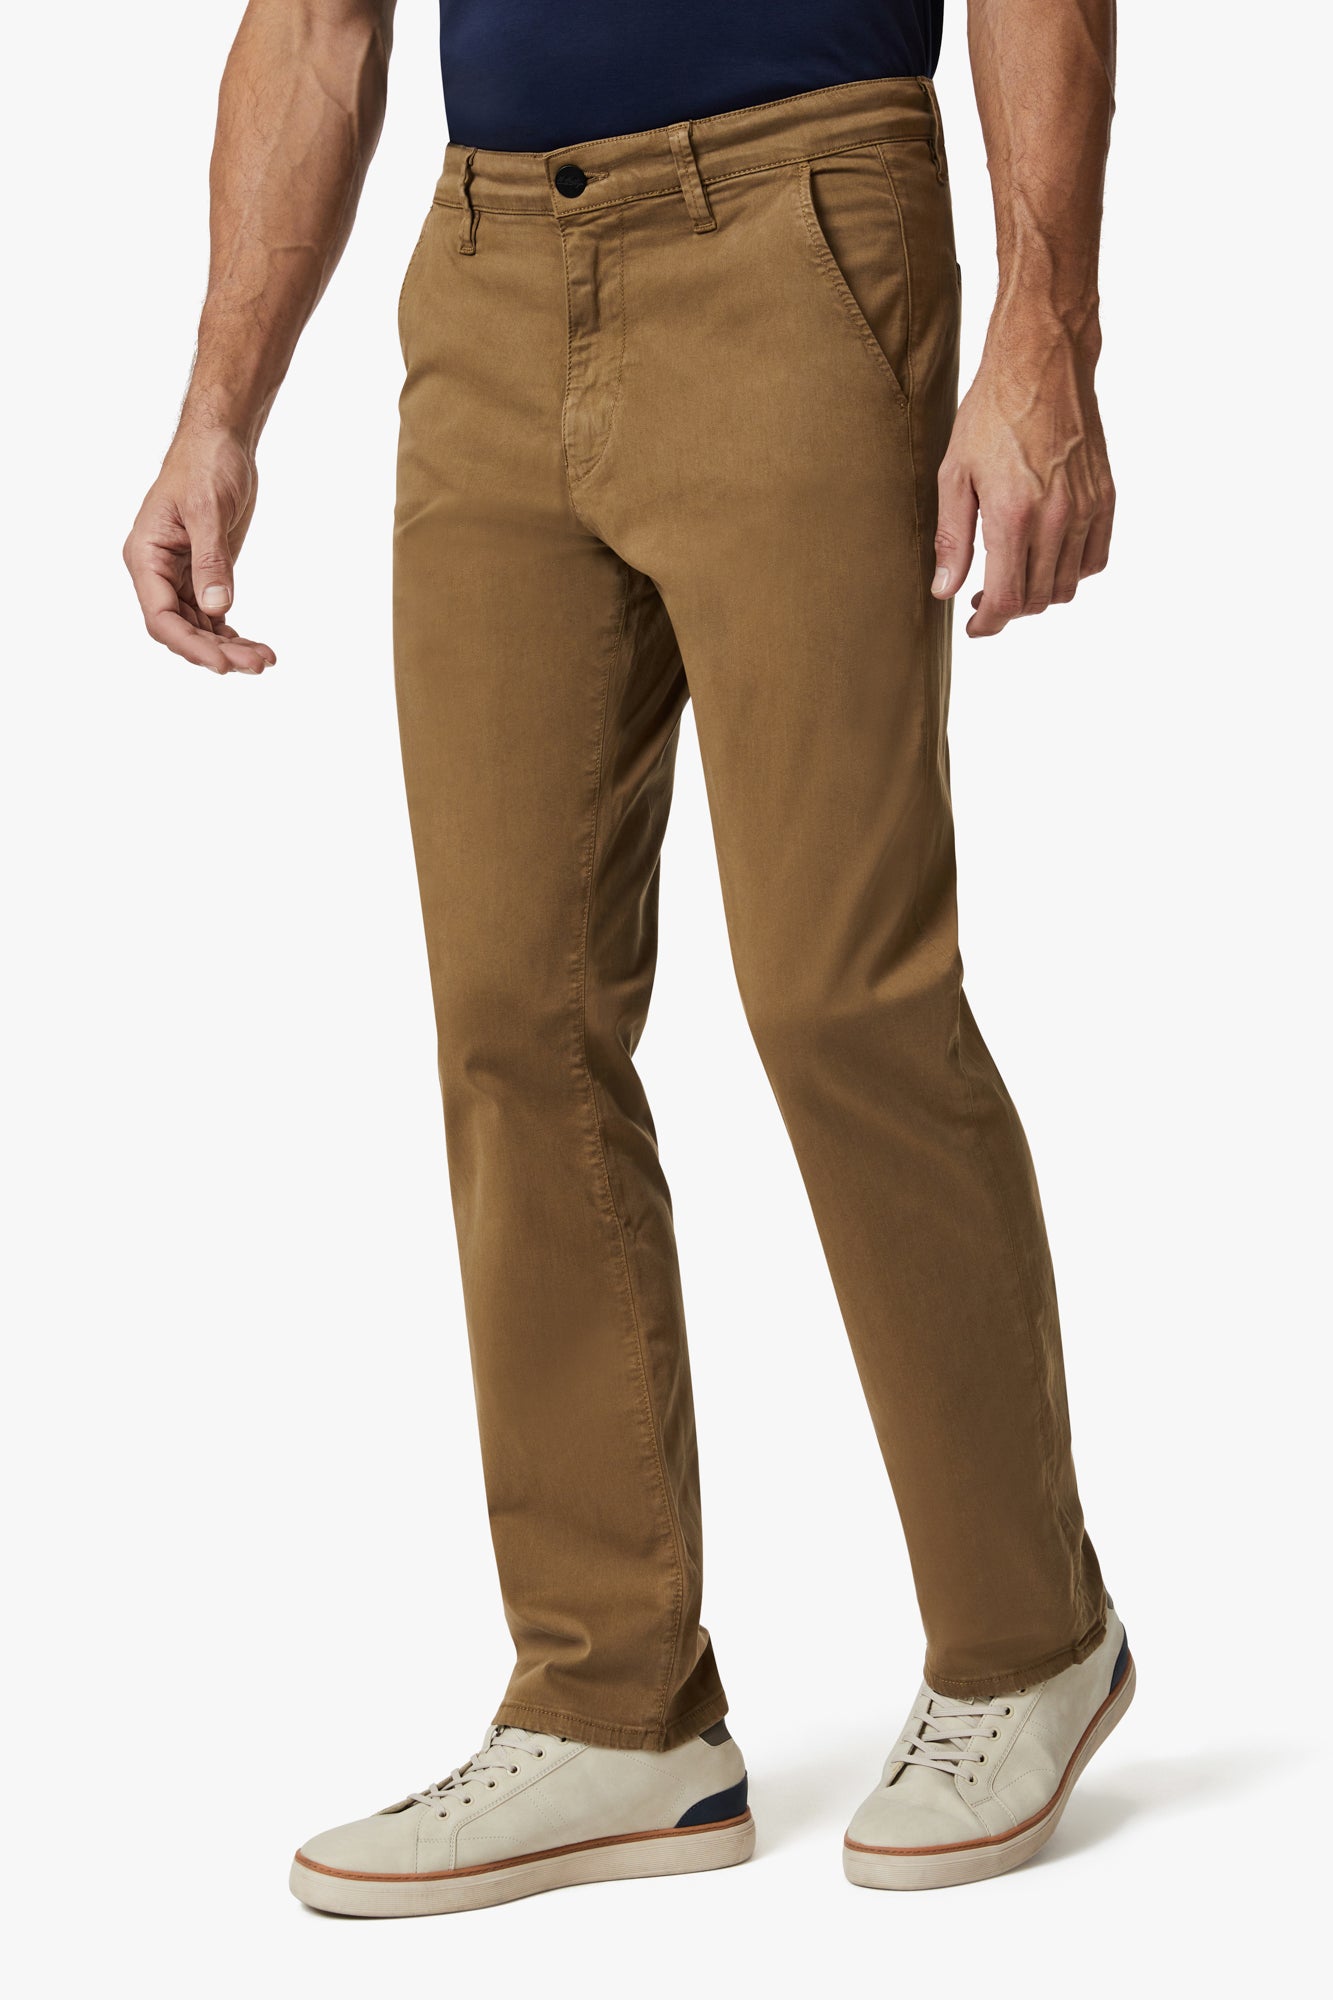 Charisma Relaxed Straight Chino Pants In Tobacco Twill Image 4